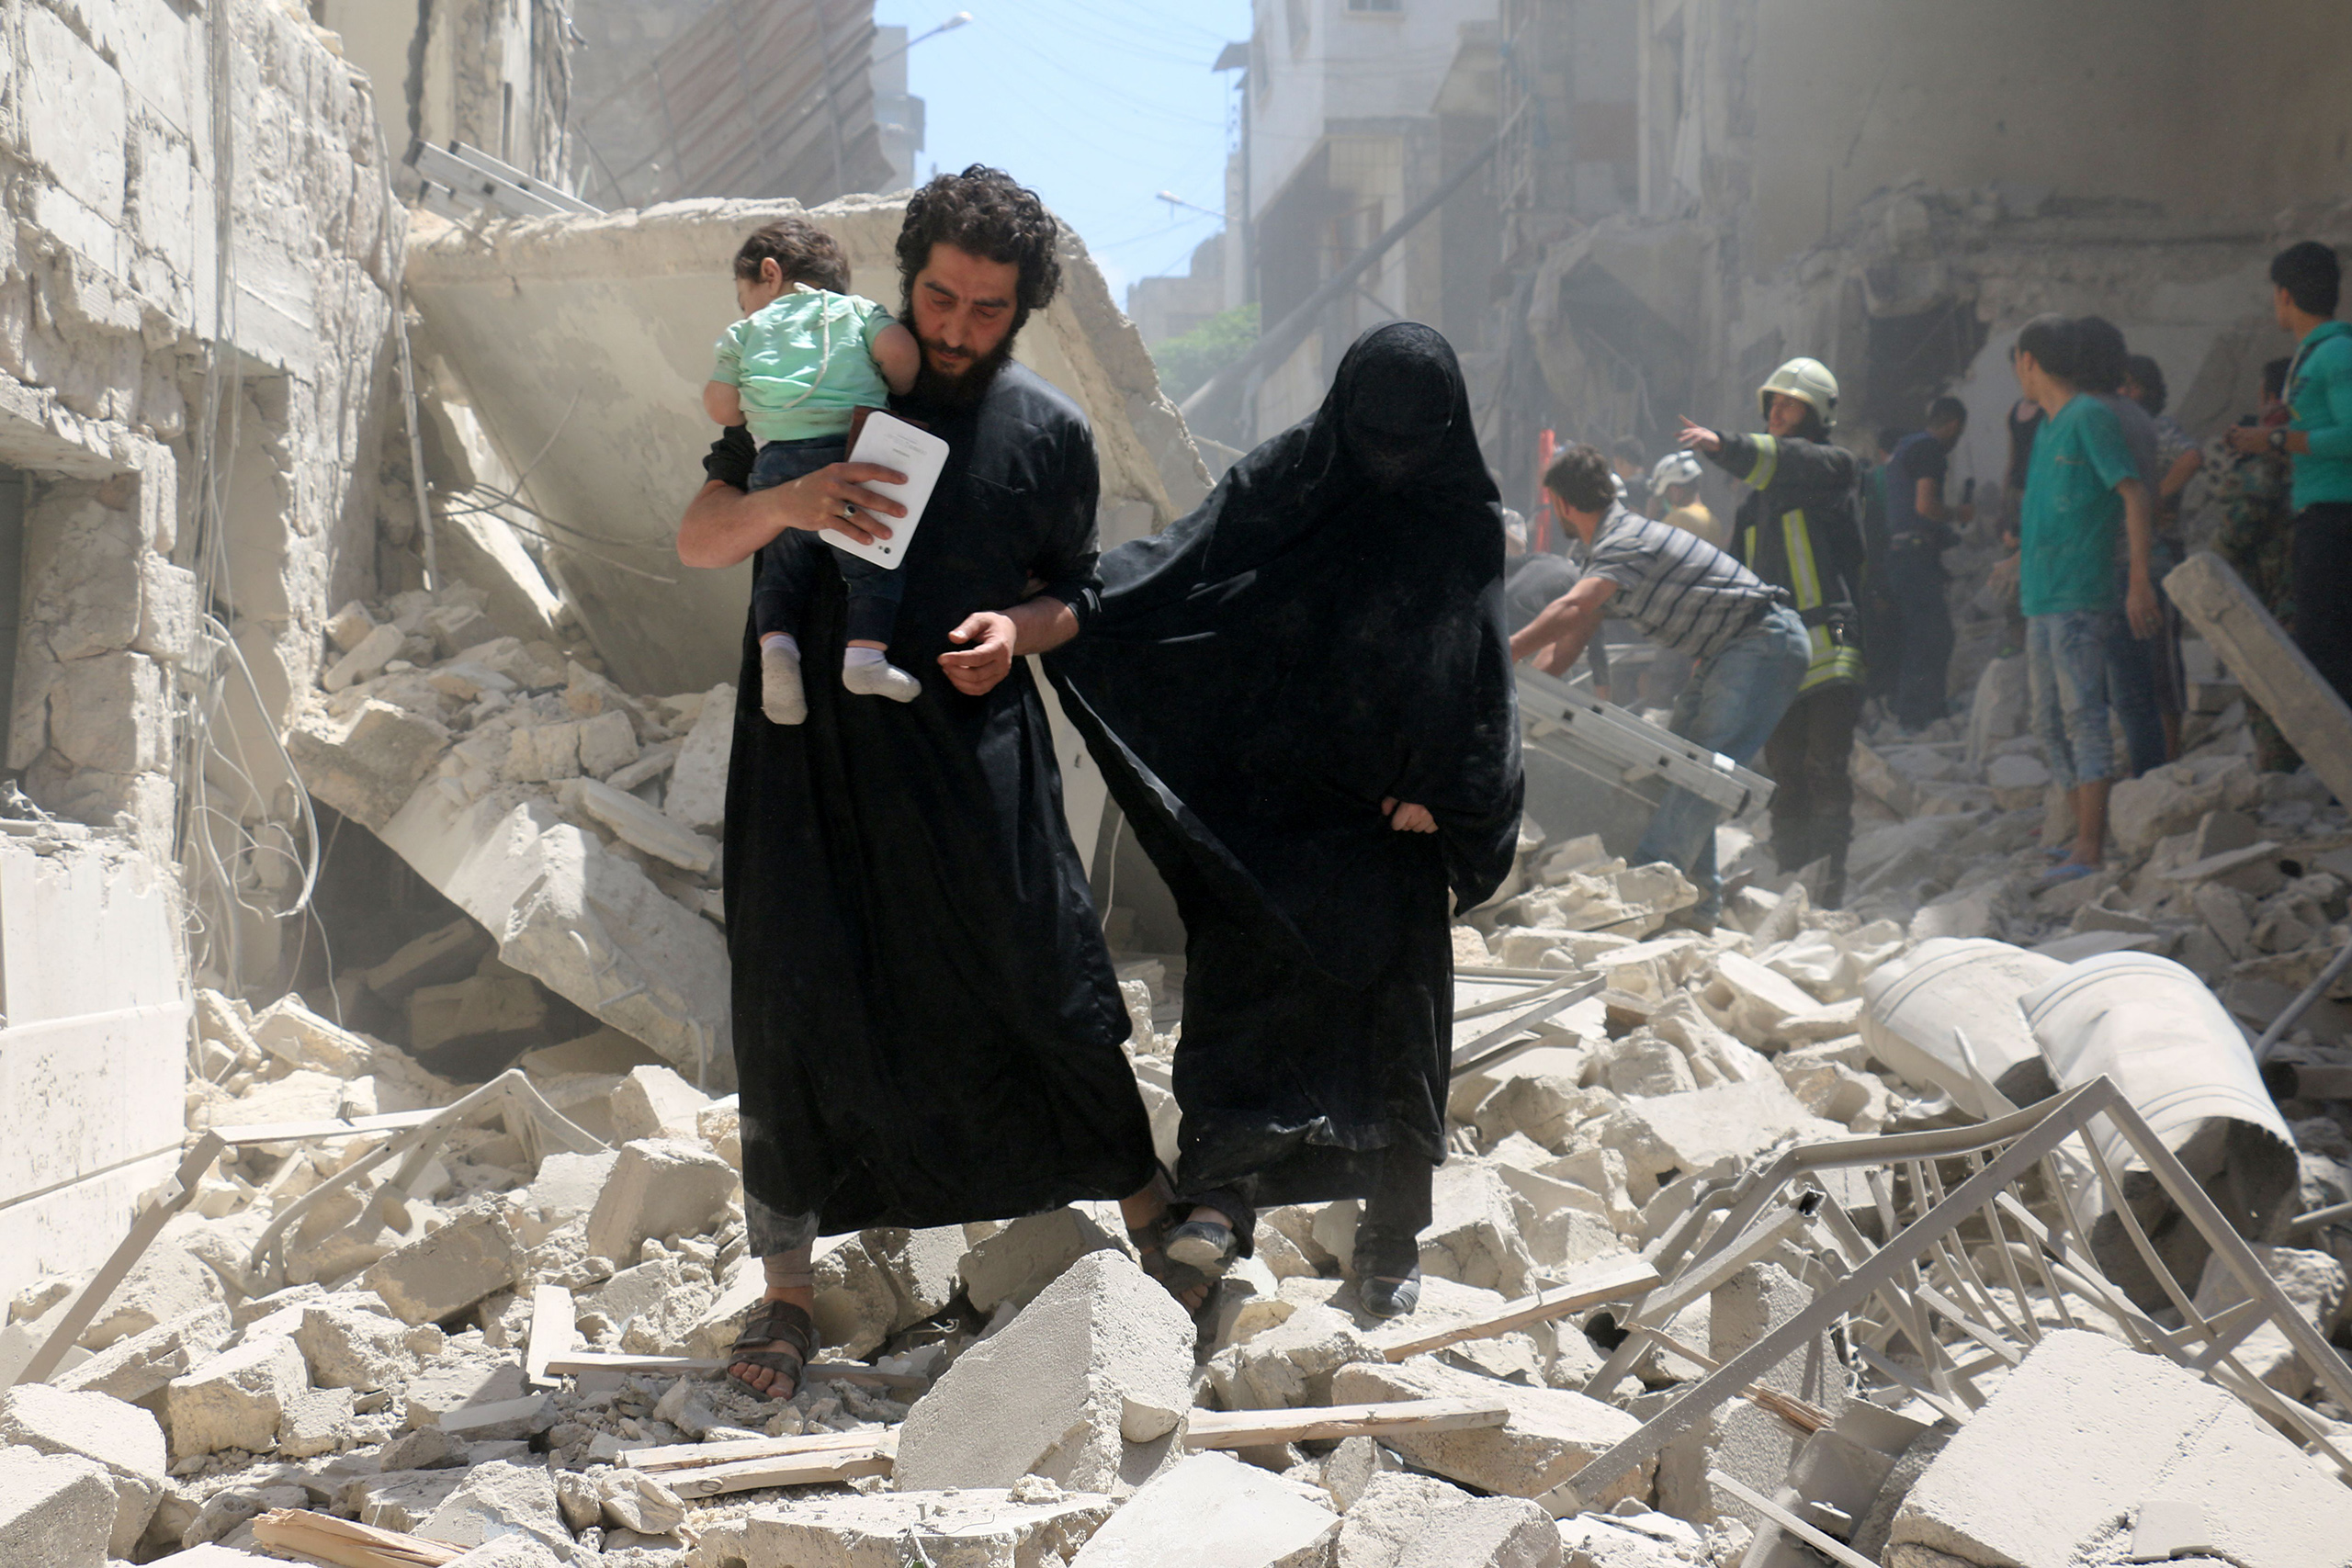 The toddler is held tightly by a man walking with a woman over the rubble. (Ameer Alhalbi—AFP/Getty Images)